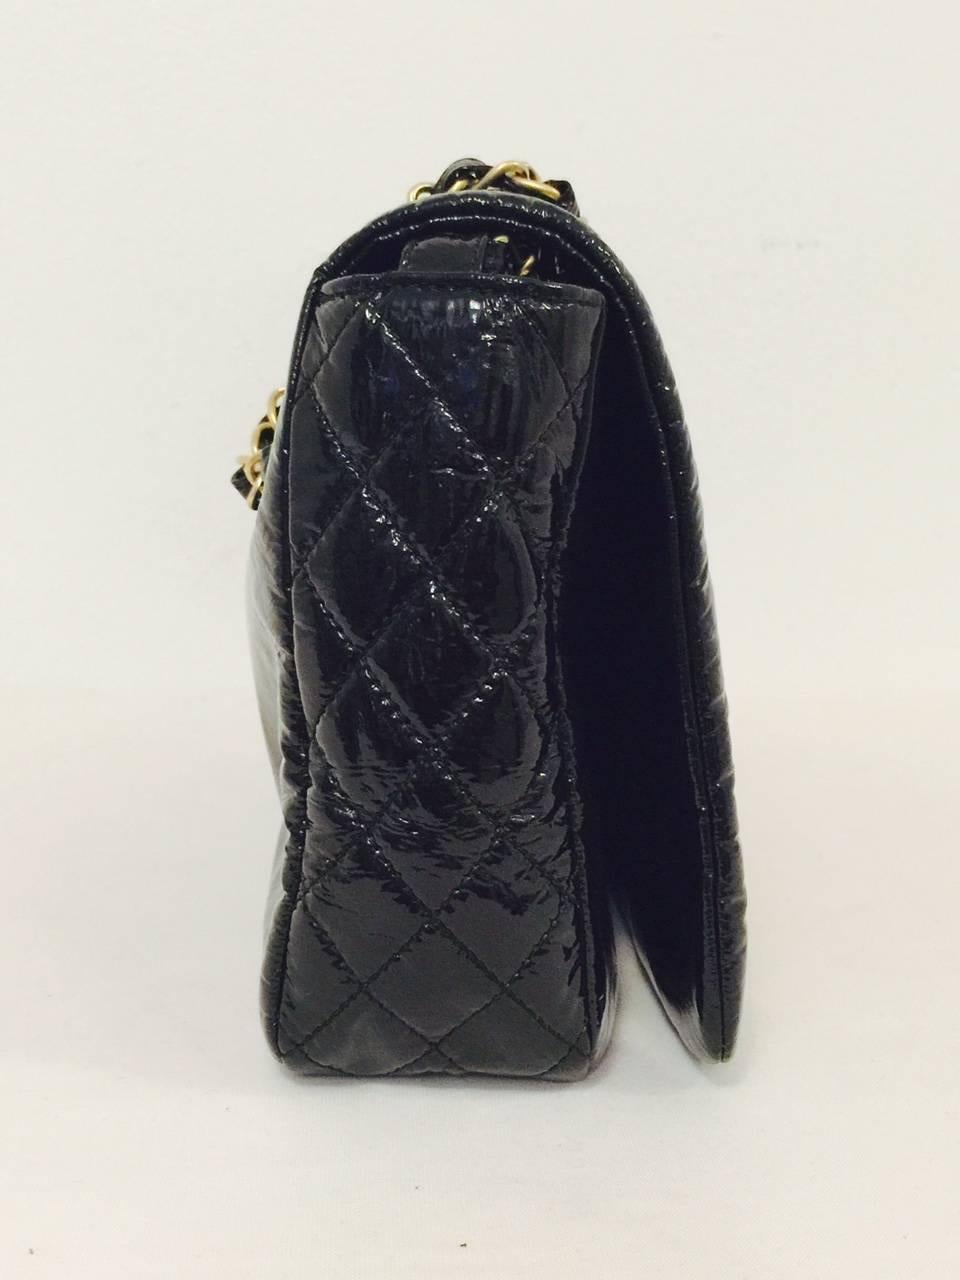 Women's Chanel Black Patent Leather Flap Bag w. Double Chain Straps Serial 11561133